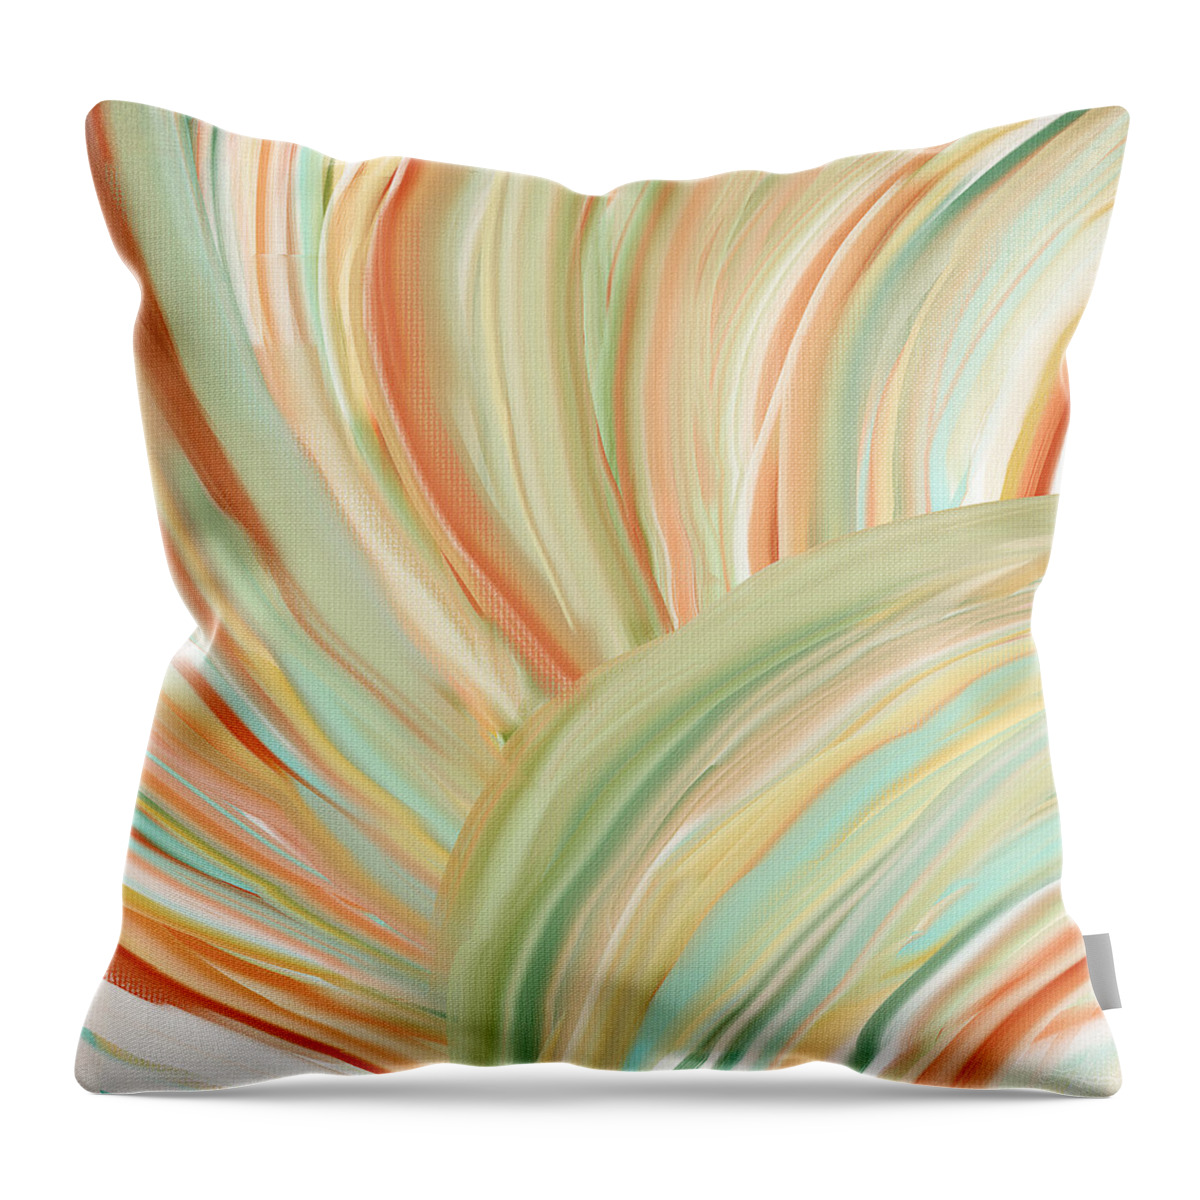 Peach Throw Pillow featuring the painting Spring Colors by Lourry Legarde